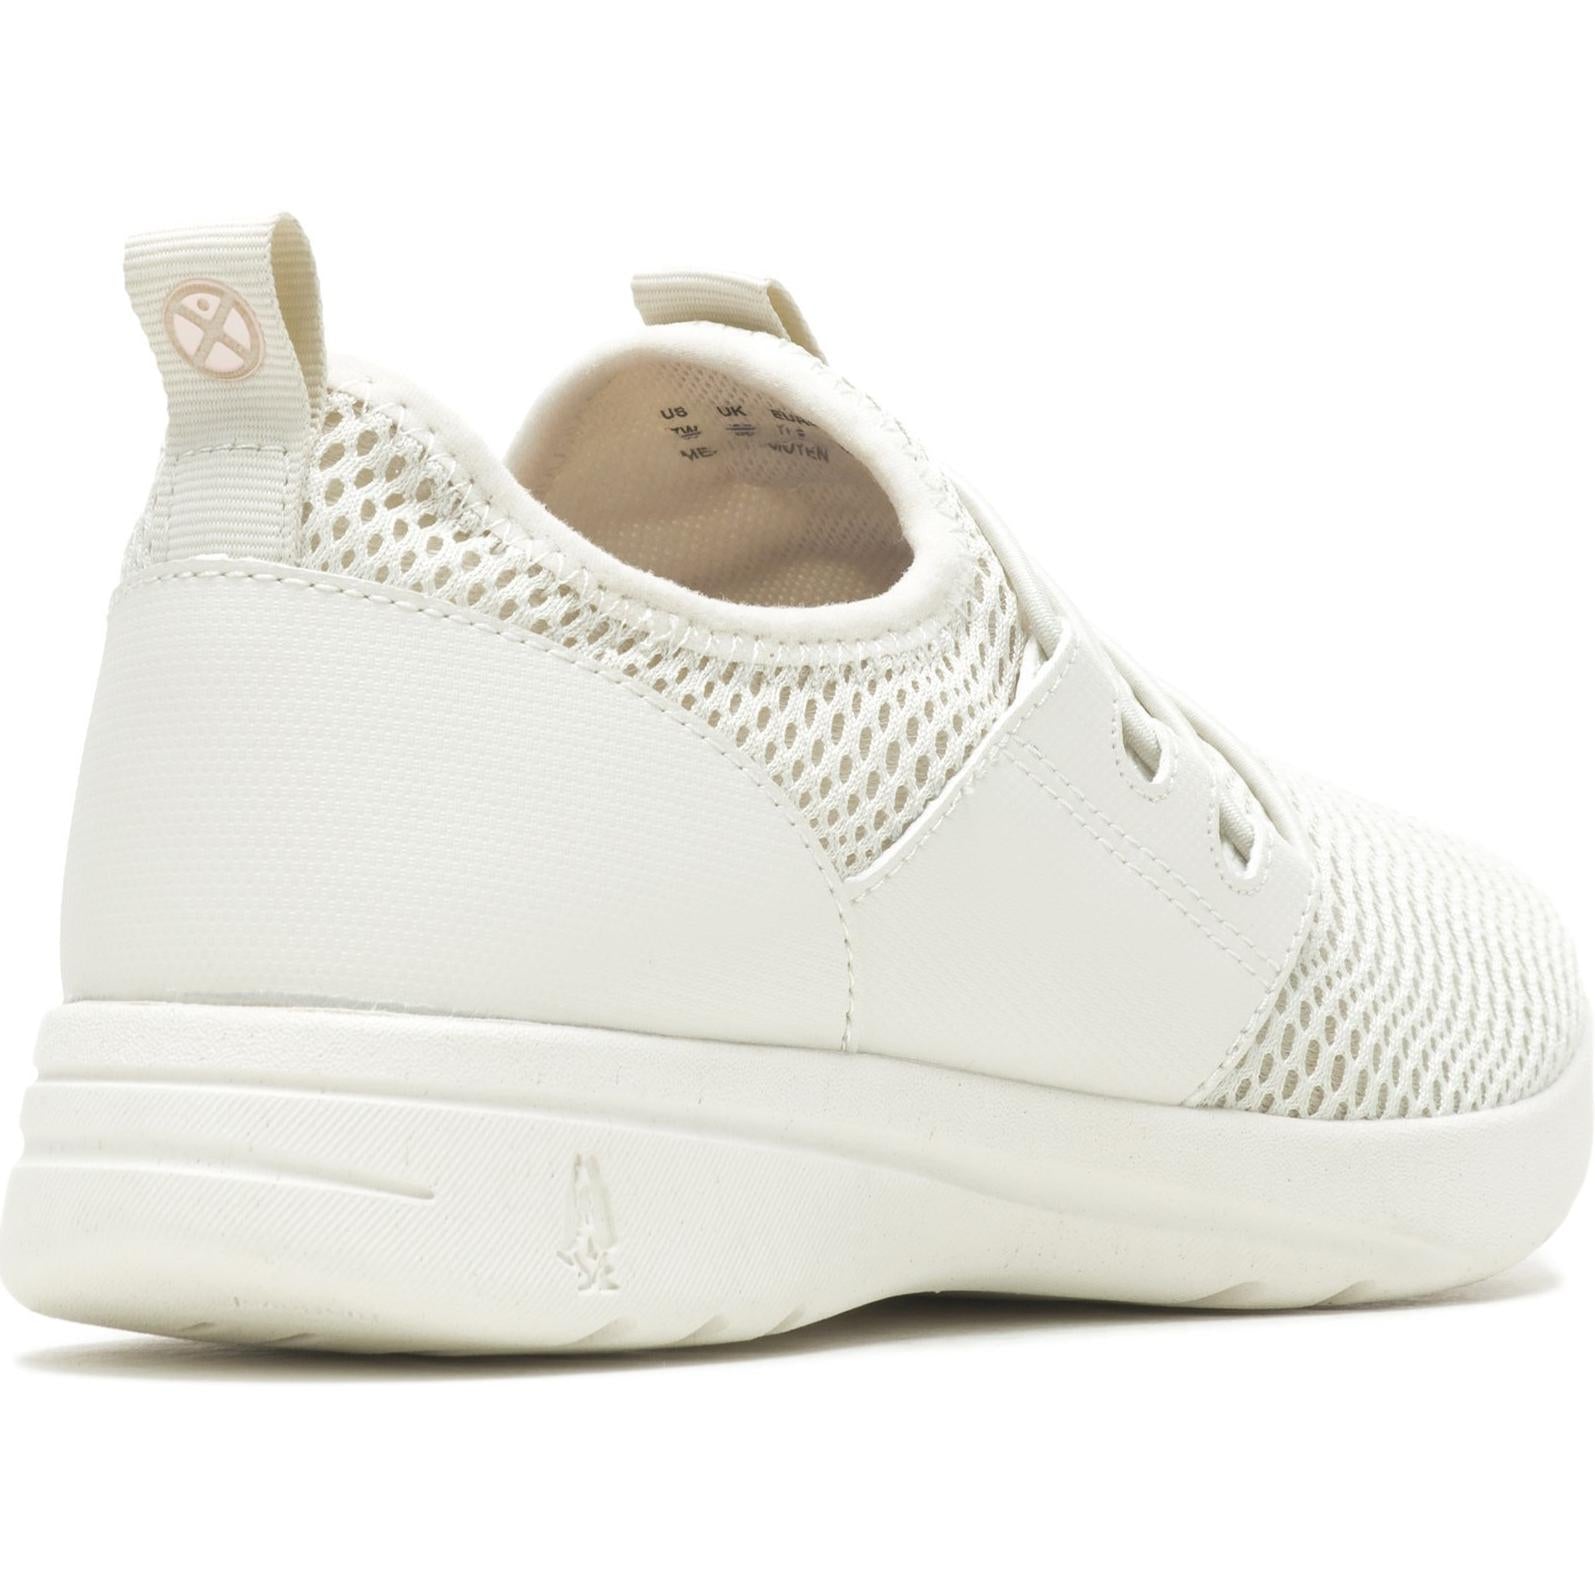 Hush Puppies Good Bungee 2.0 Trainers